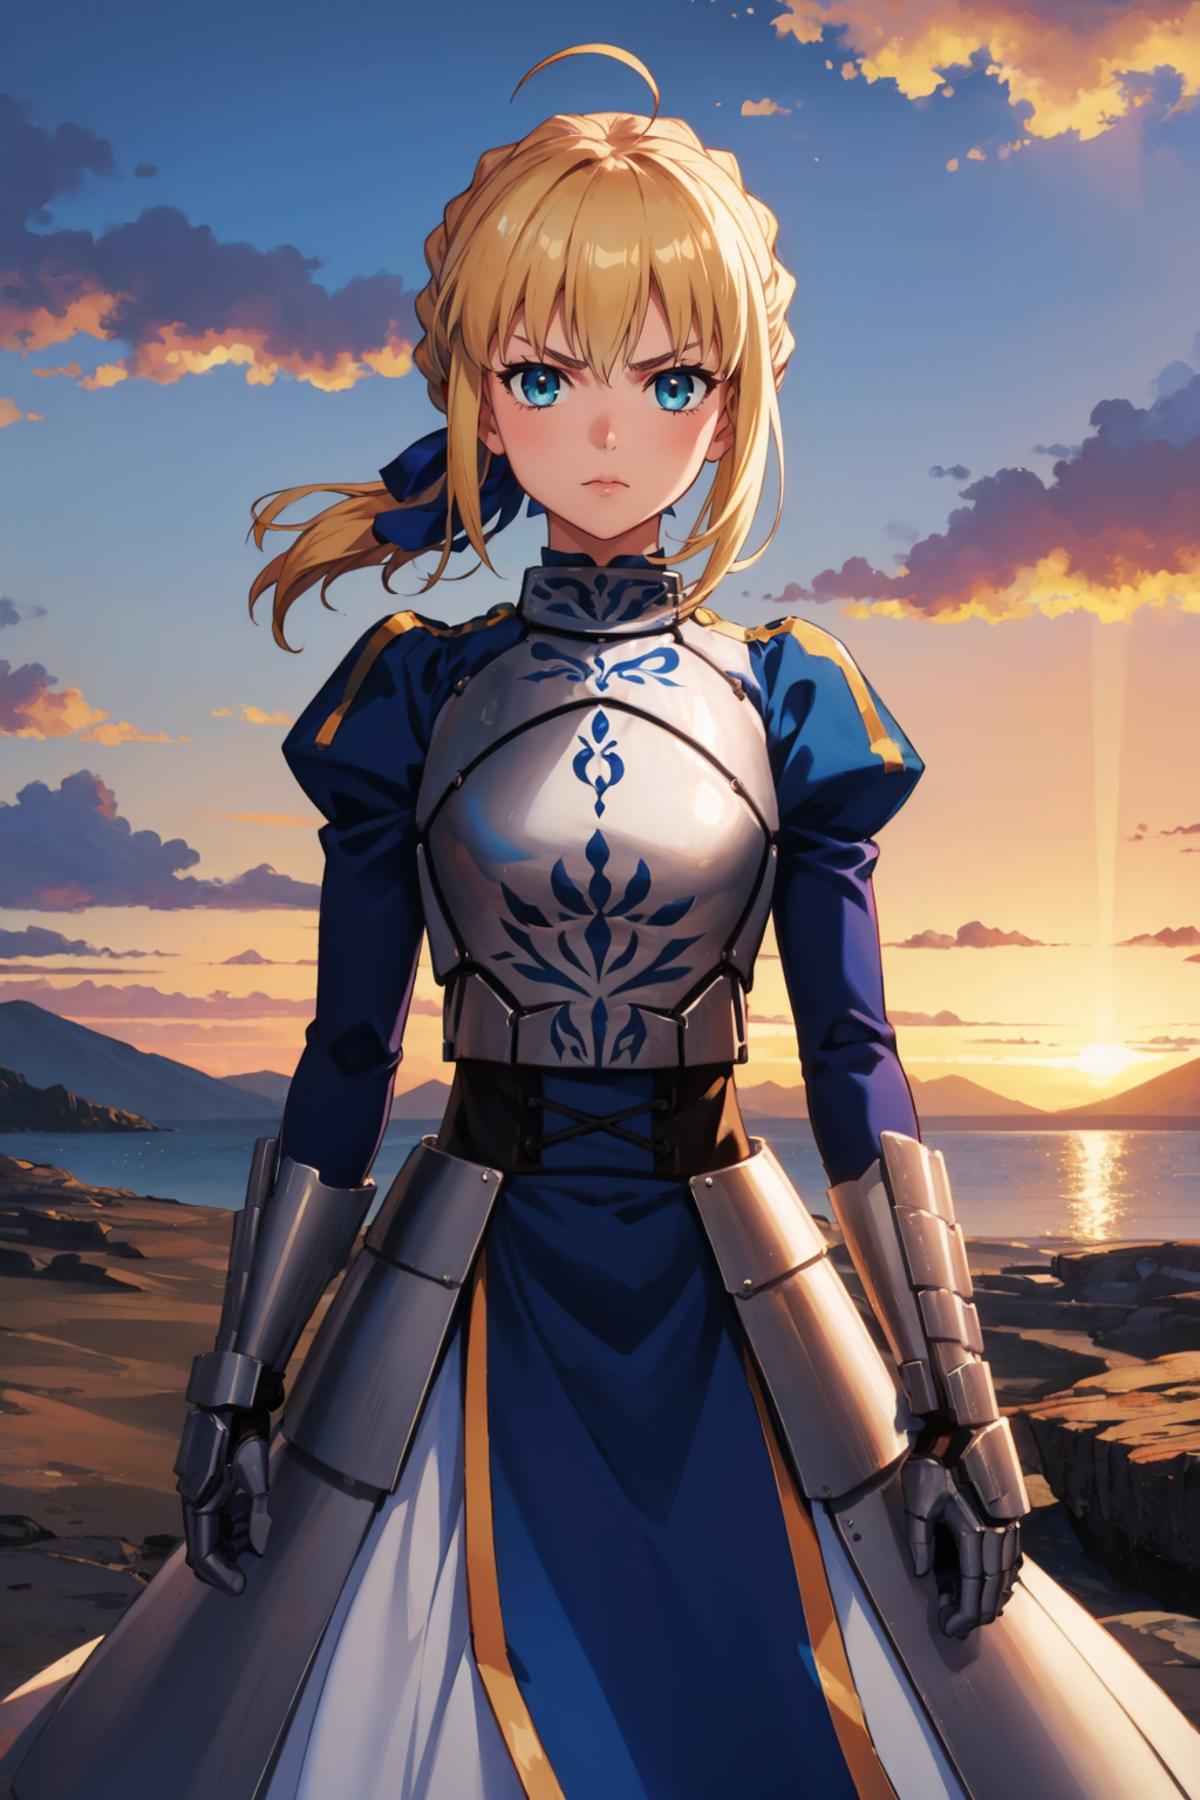 Artoria Pendragon (Saber) | Fate/stay night image by novowels